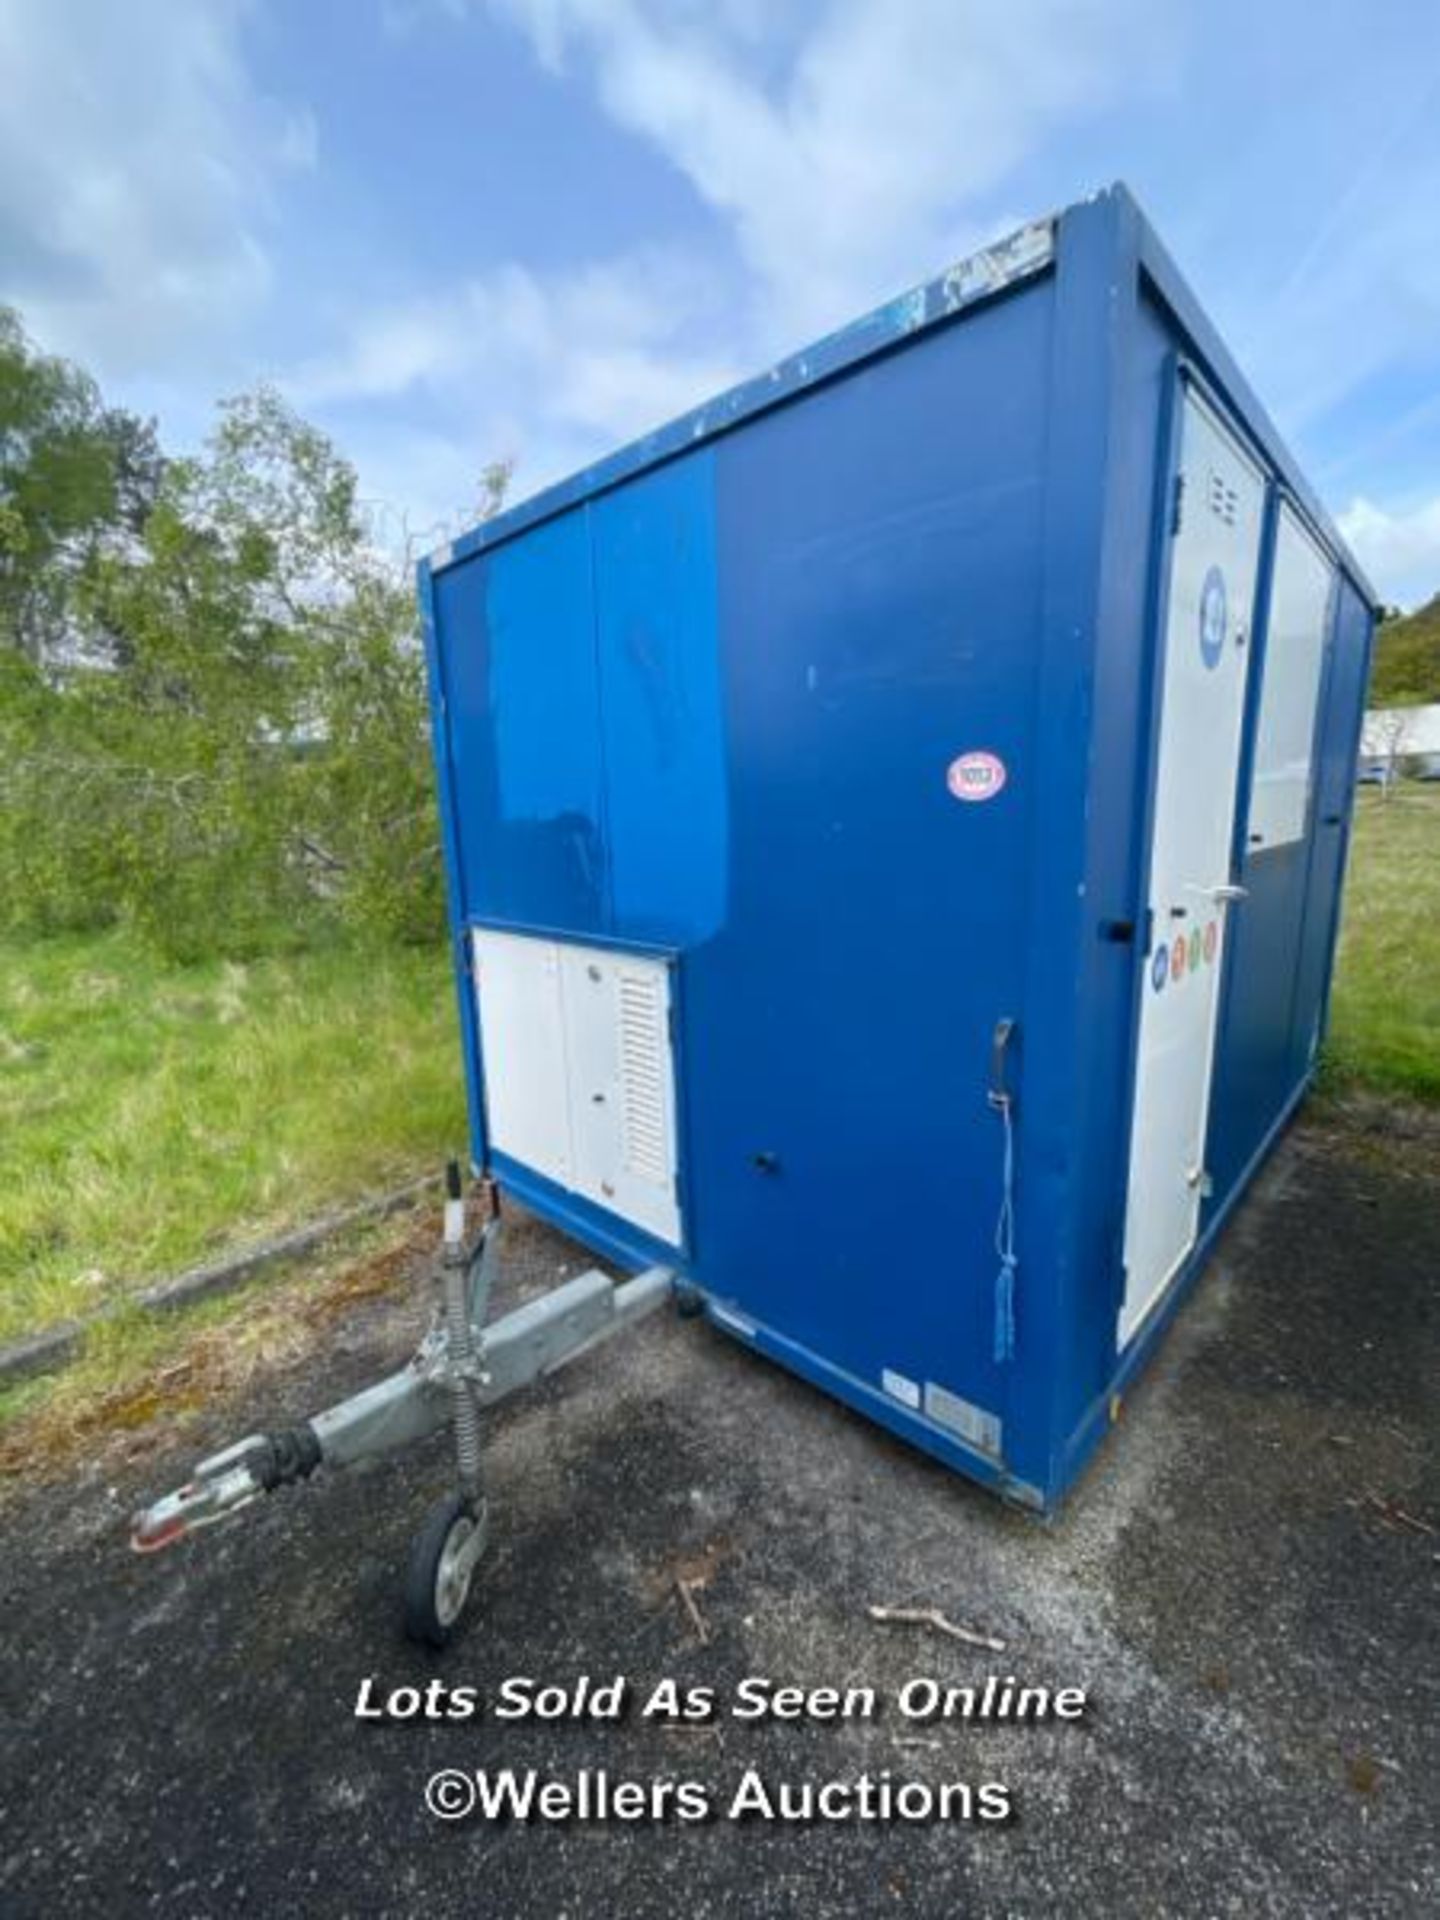 6 PERSON 12 X 7.5FT AJC EASY CABIN TOWABLE WELFARE UNIT, INCLUDES WASH BASIN, KETTLE, MICROWAVE, - Image 3 of 19